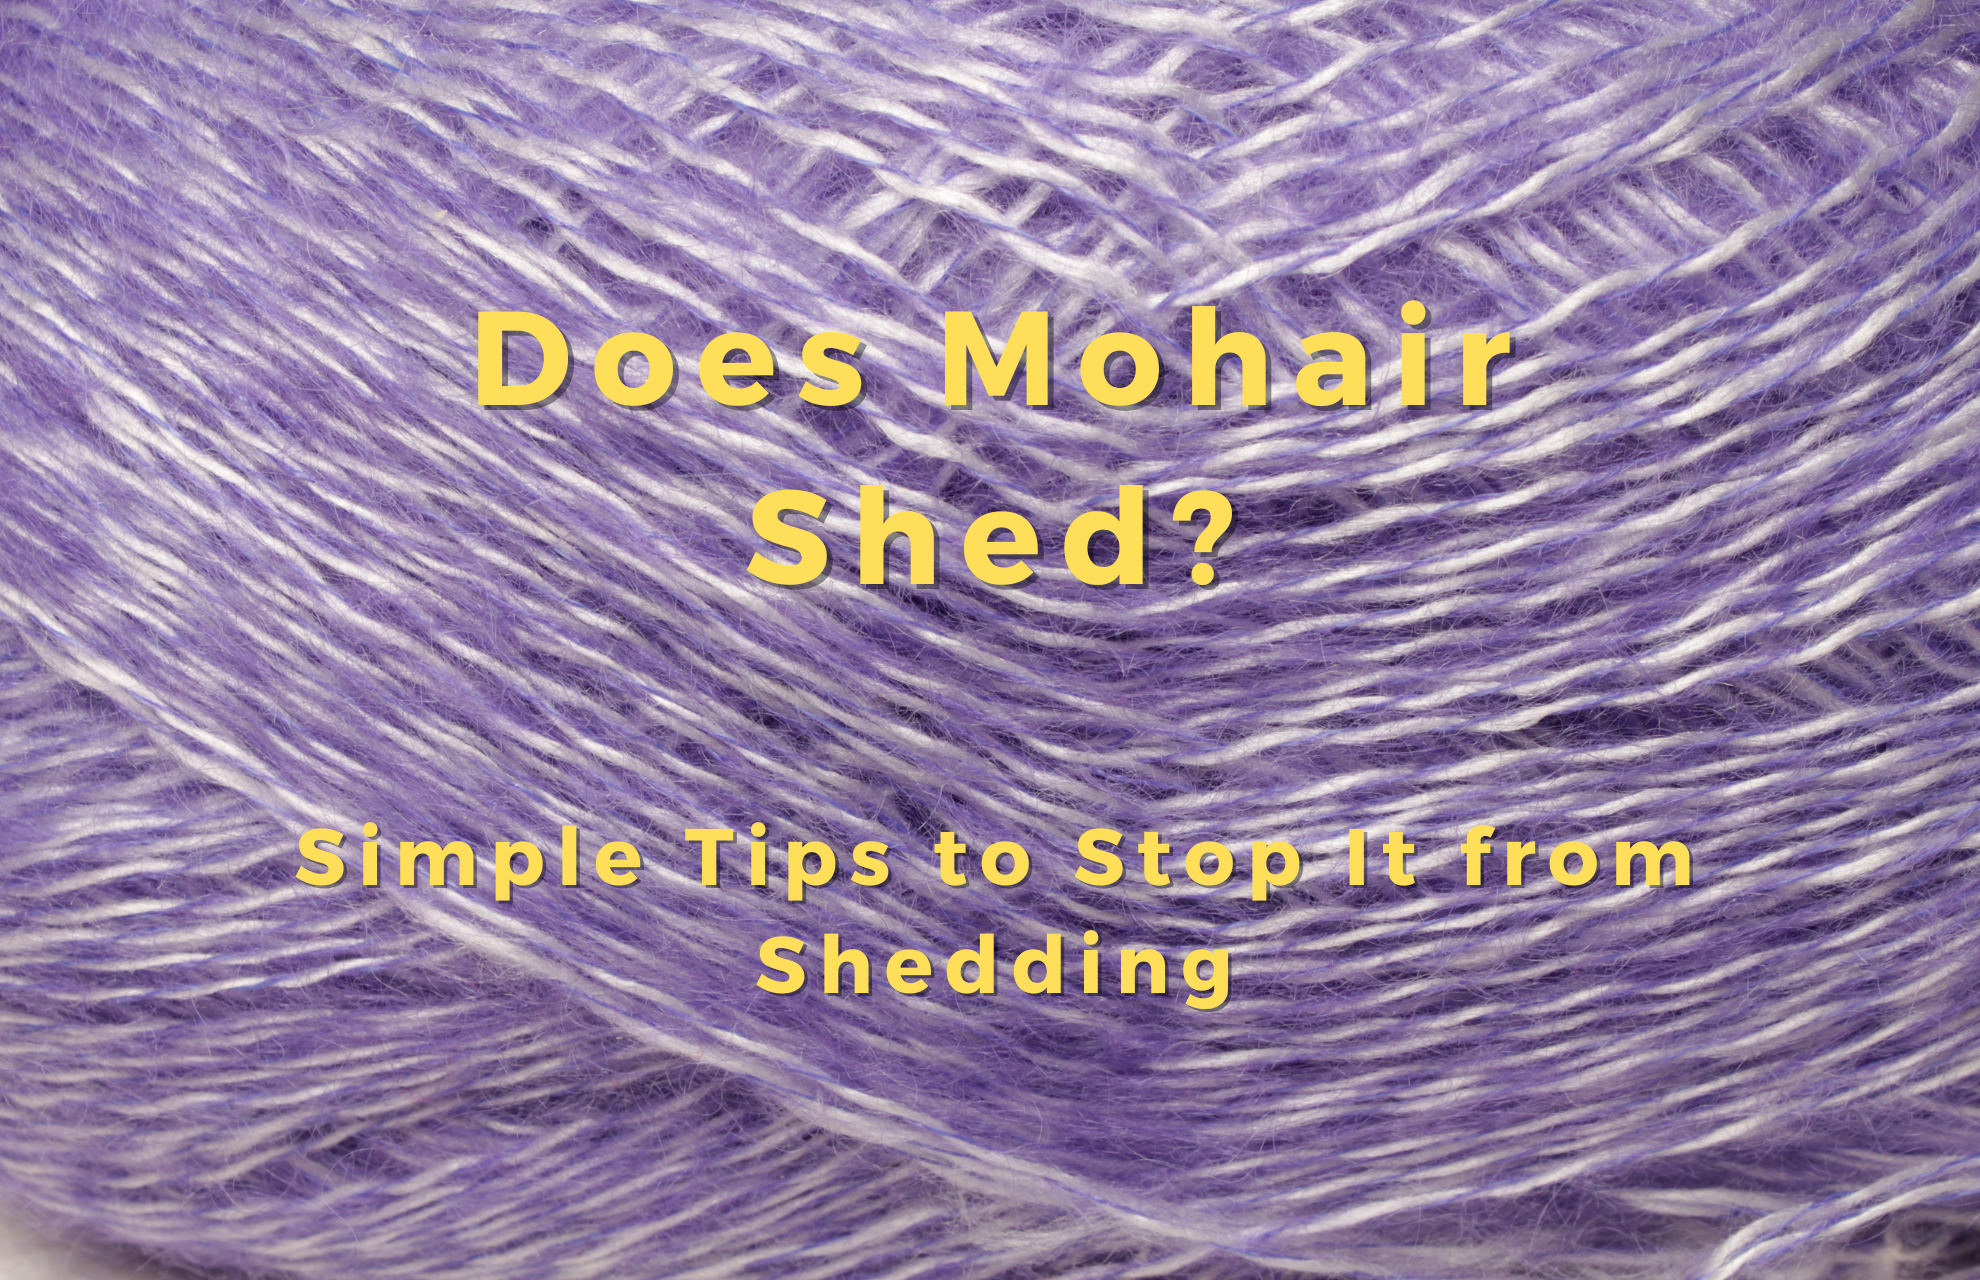 Does Mohair Shed? 5 Simple Tips to Stop It from Shedding